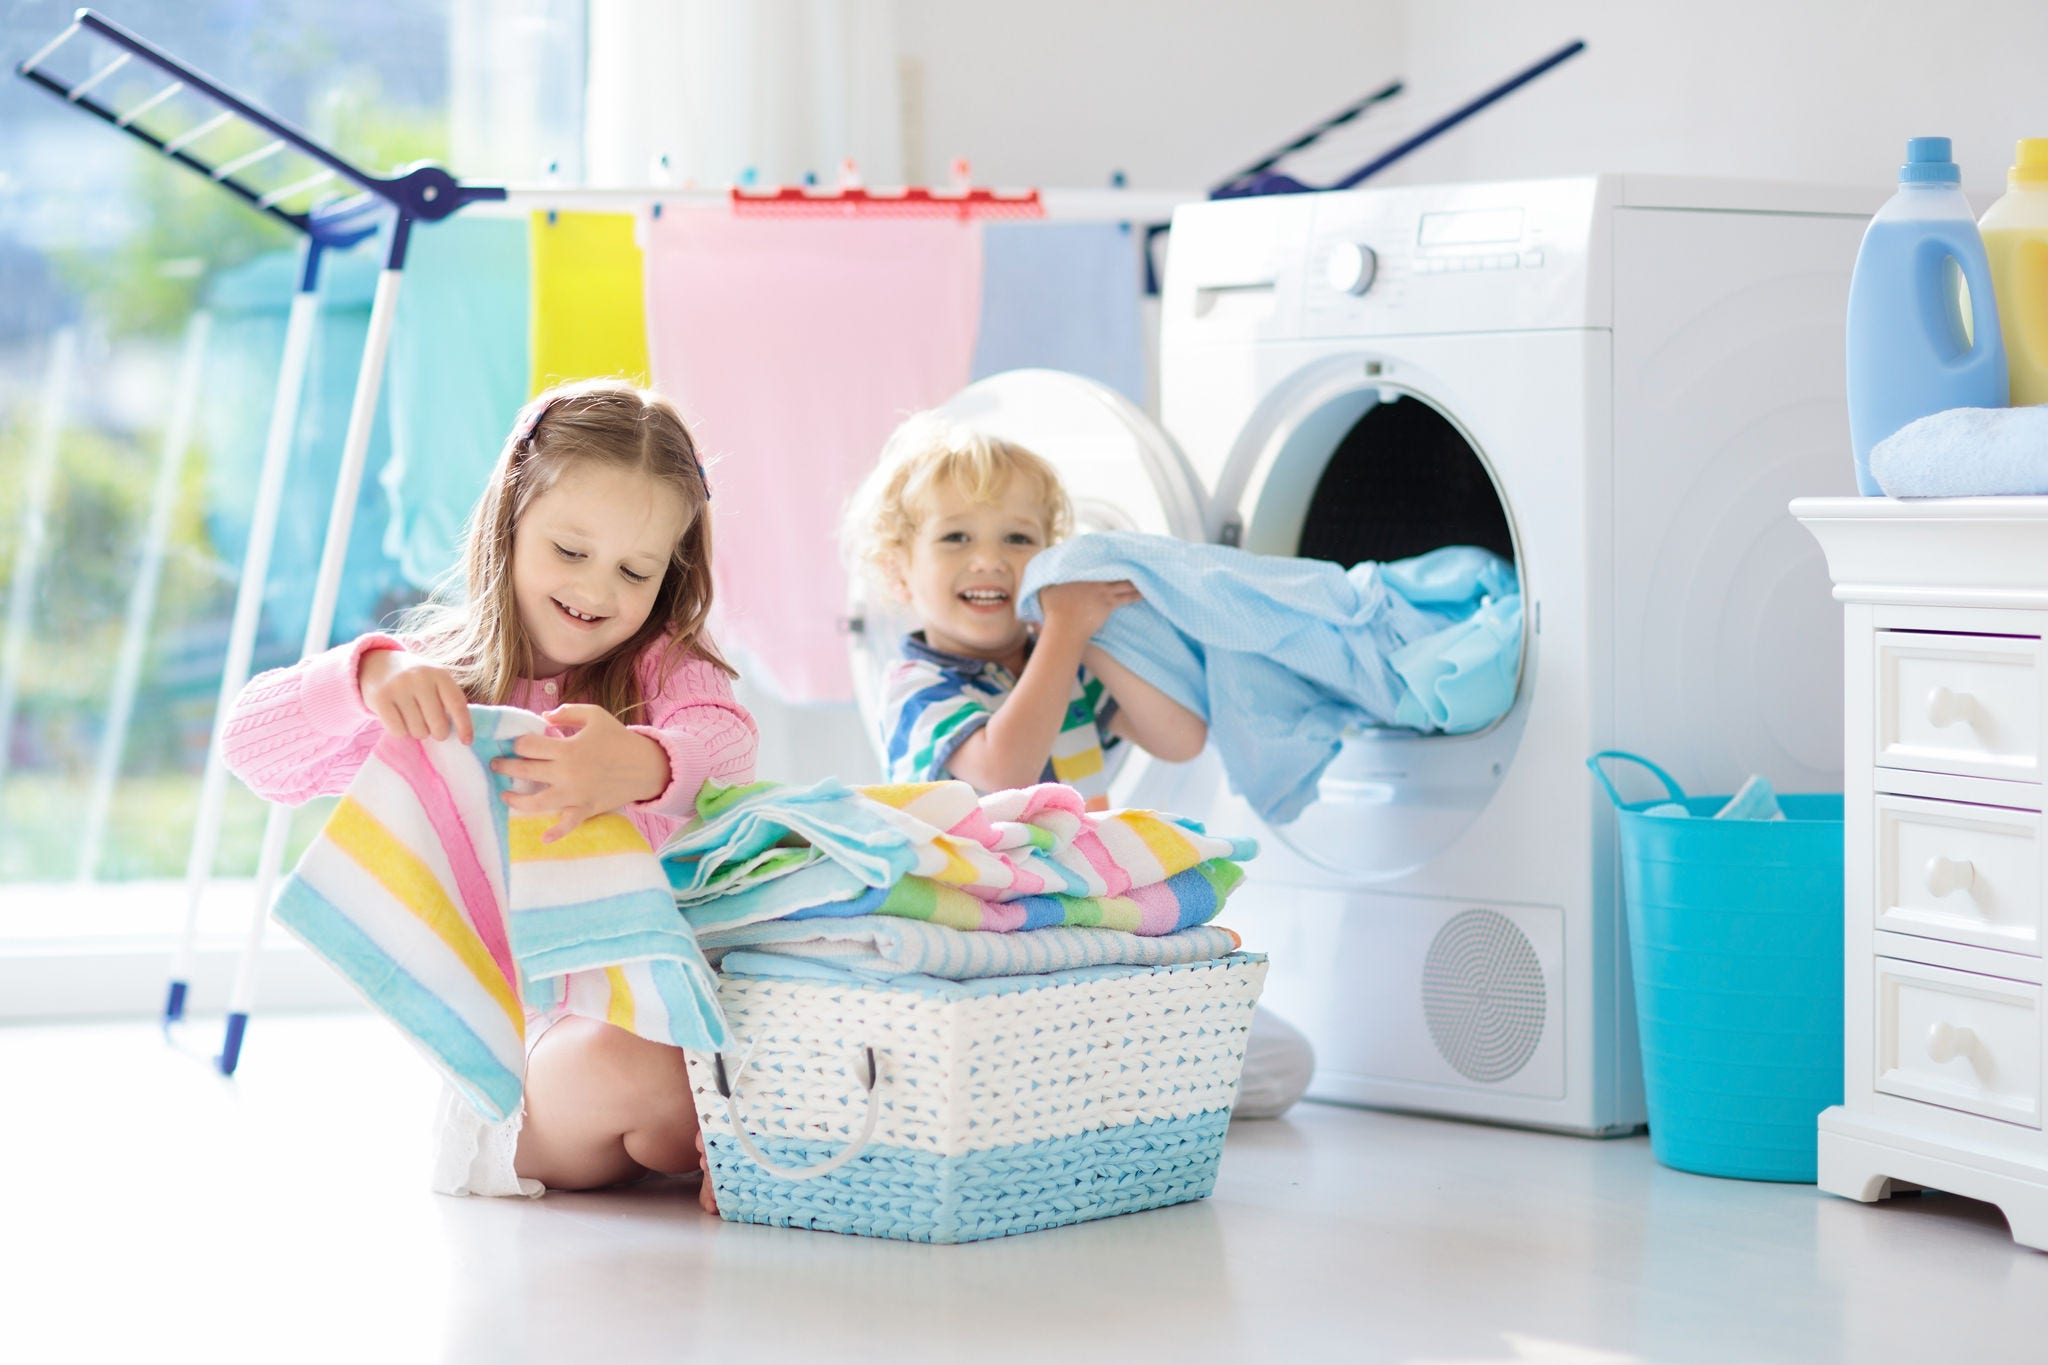 Children in laundry room with washing machine or tumble dryer. Kids help with family chores. Modern household devices and washing detergent in white sunny home. Clean washed clothes on drying rack.